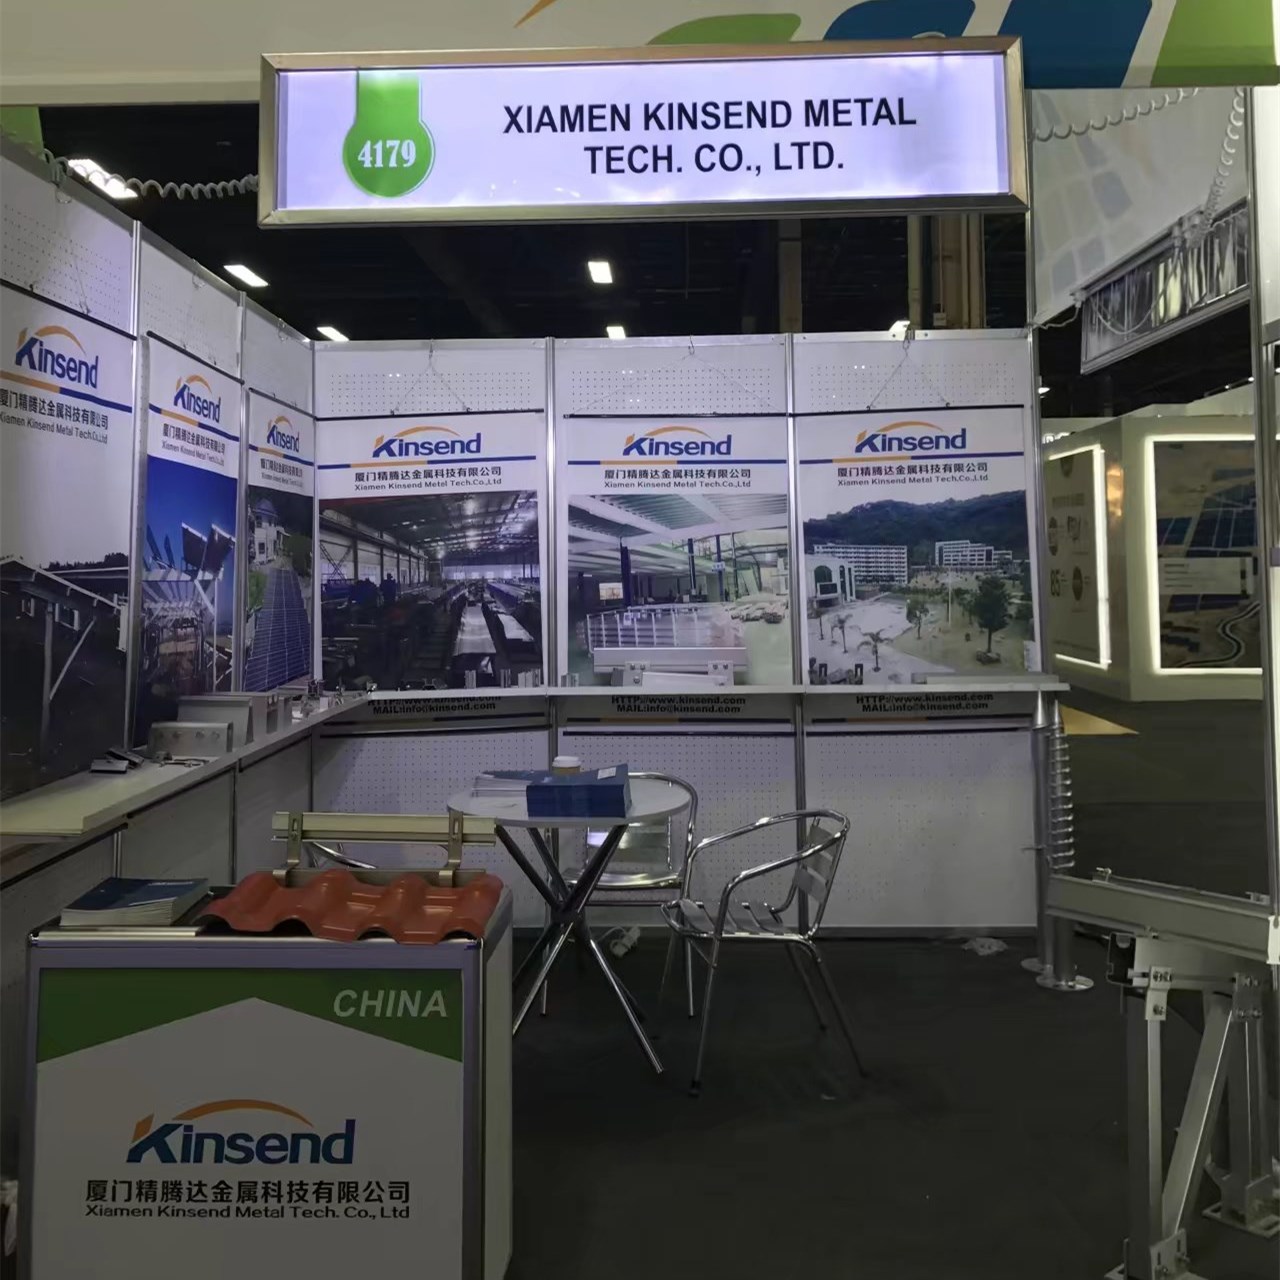 Kinsend exhibited at Solar Power International in USA 2017.